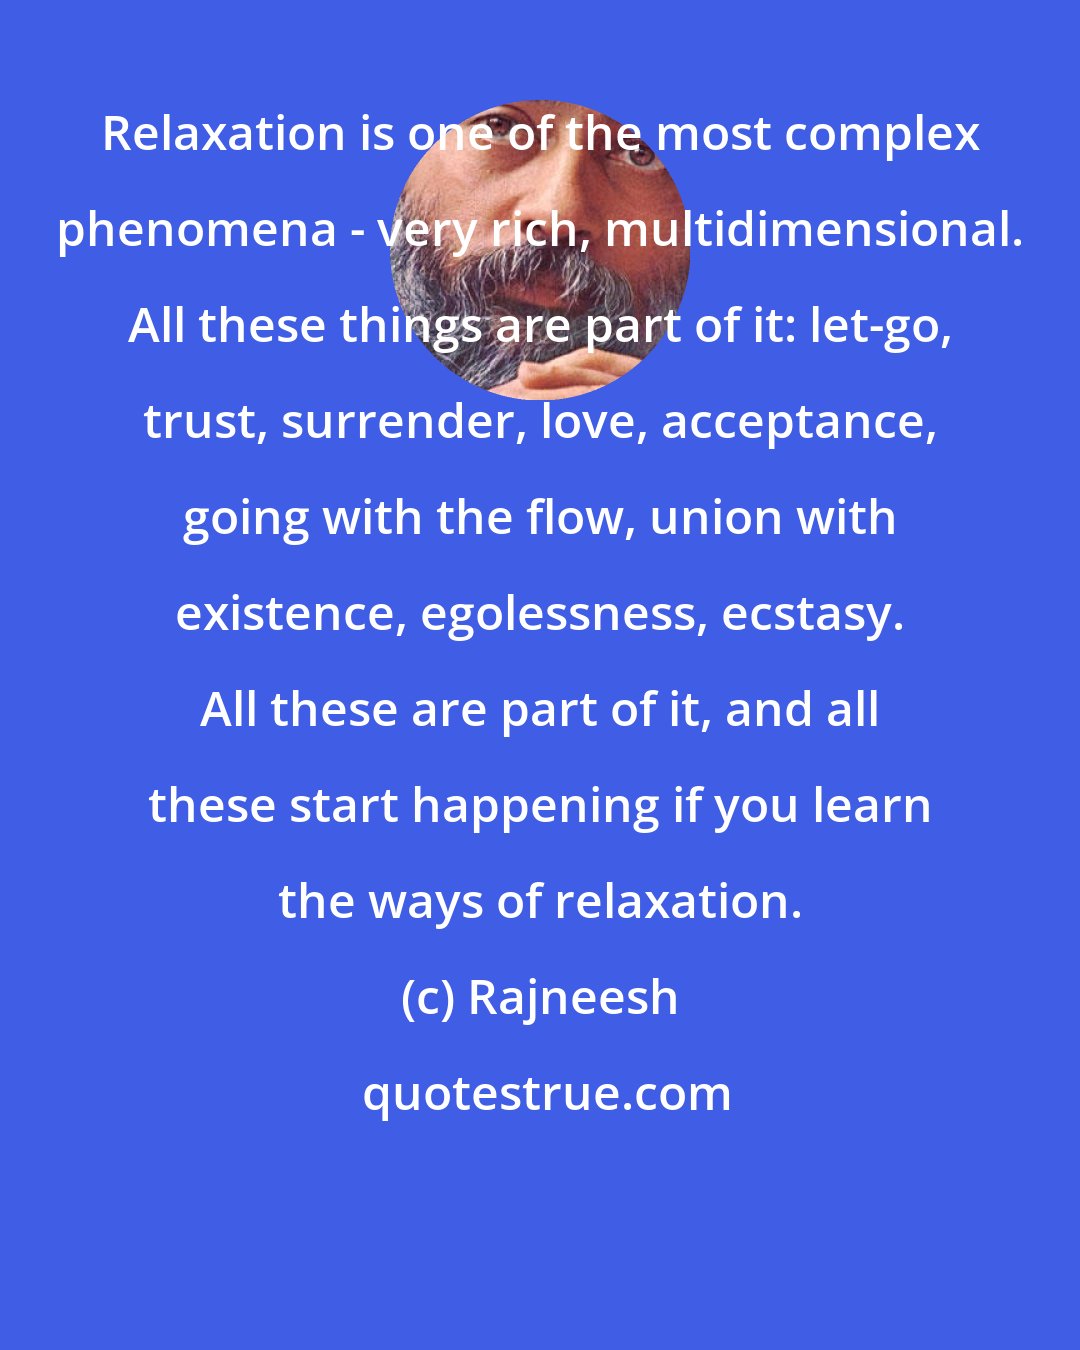 Rajneesh: Relaxation is one of the most complex phenomena - very rich, multidimensional. All these things are part of it: let-go, trust, surrender, love, acceptance, going with the flow, union with existence, egolessness, ecstasy. All these are part of it, and all these start happening if you learn the ways of relaxation.